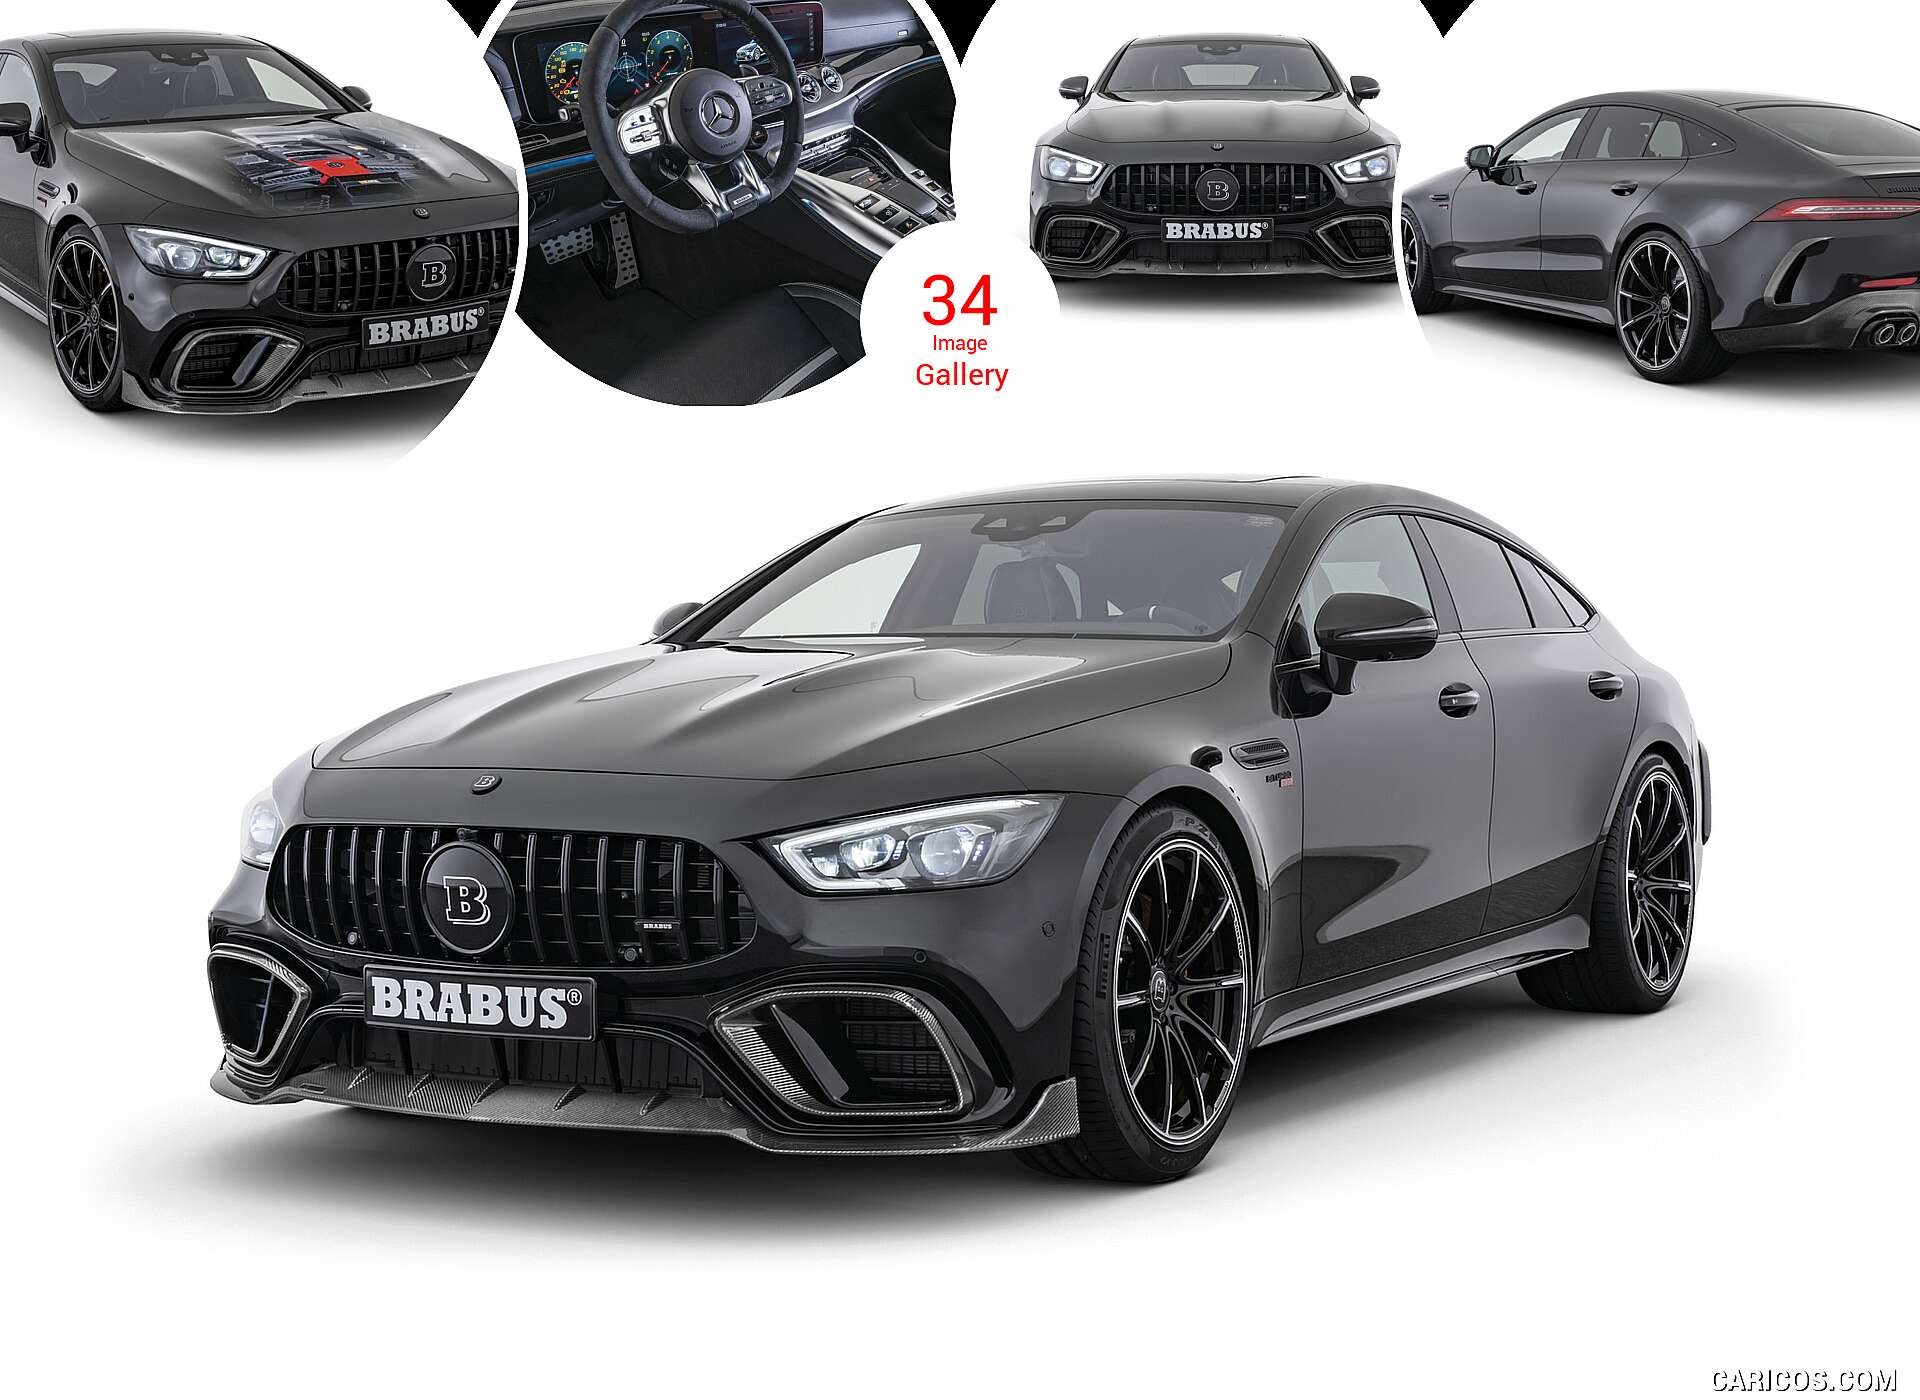 2019 Brabus 800 Based On The Mercedes Amg Gt 63 S Caricos Com